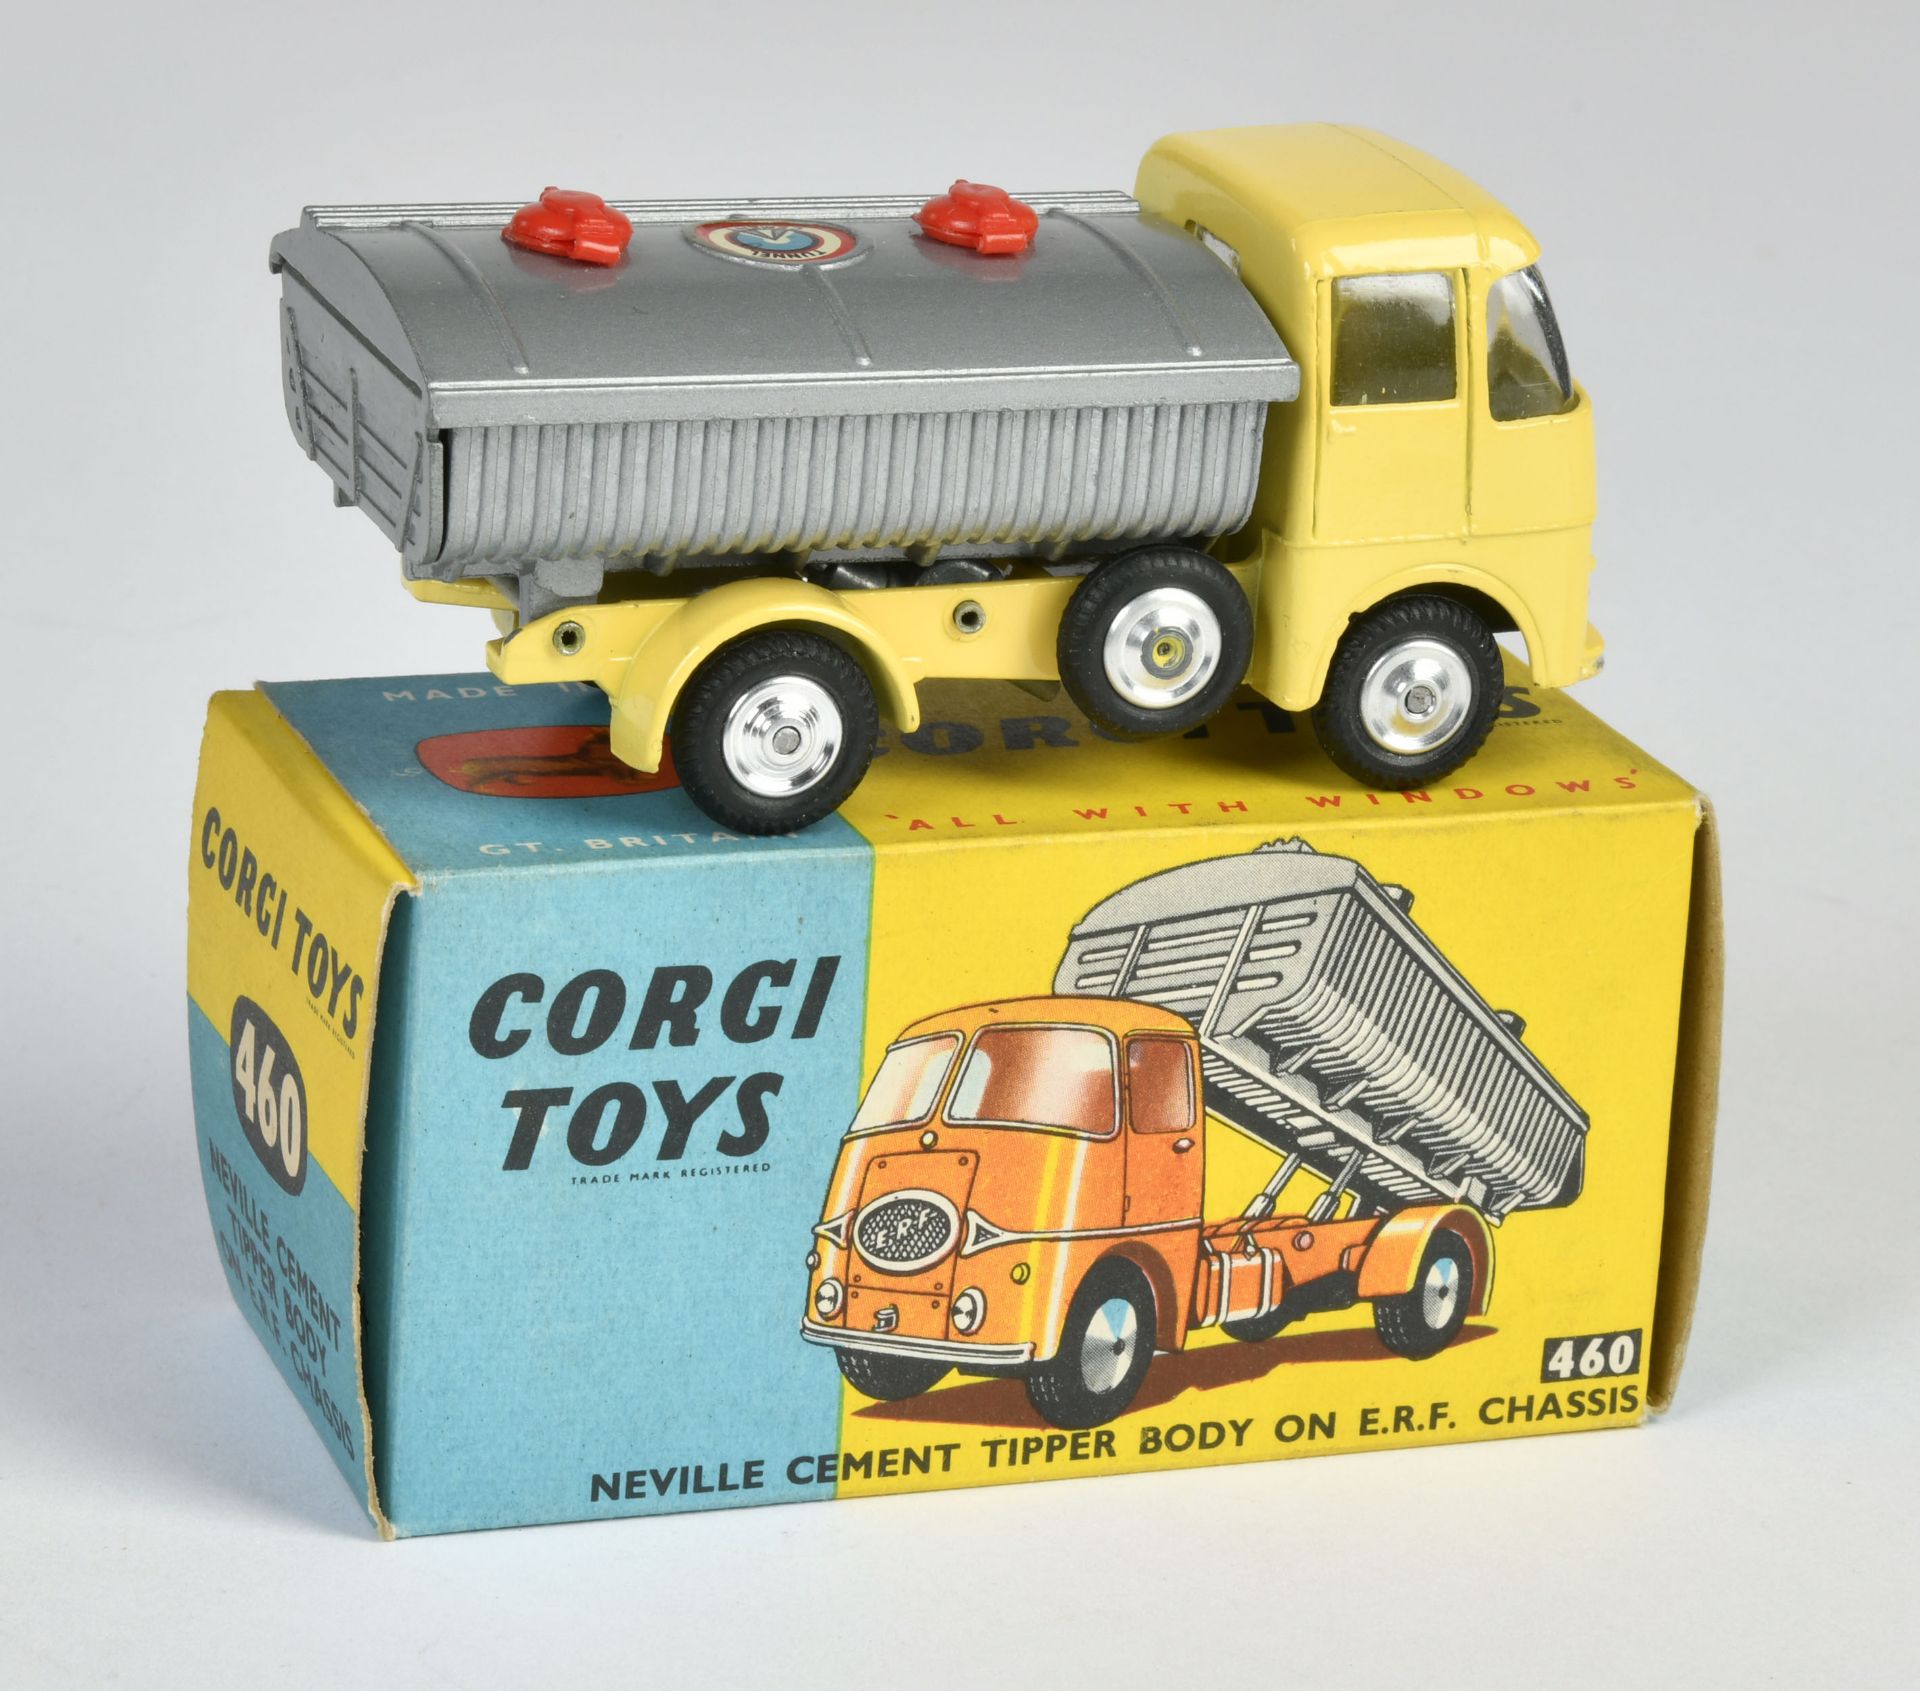 Corgi Toys, 460 Neville Cement, yellow, England, 1:43, diecast, box C 1, with club leaflet, C 1 - Image 2 of 2